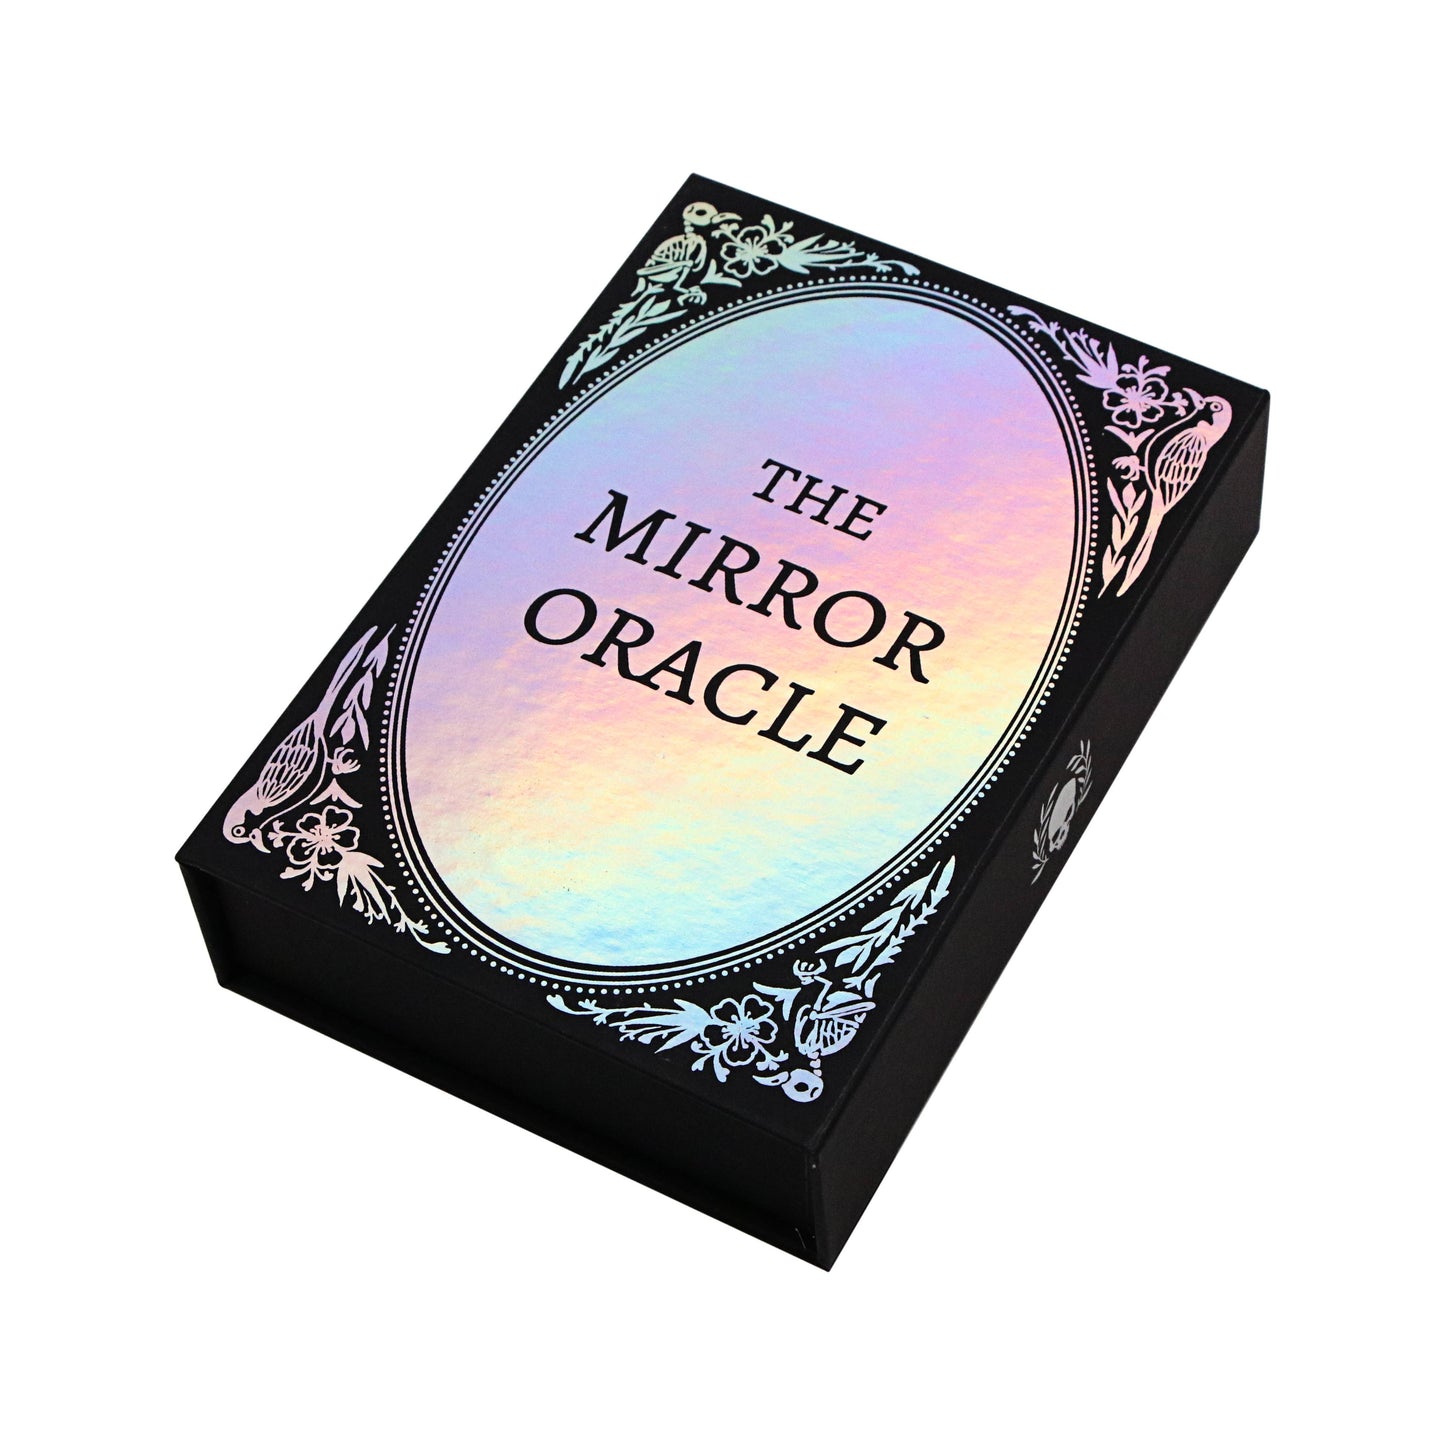 The Mirror Oracle